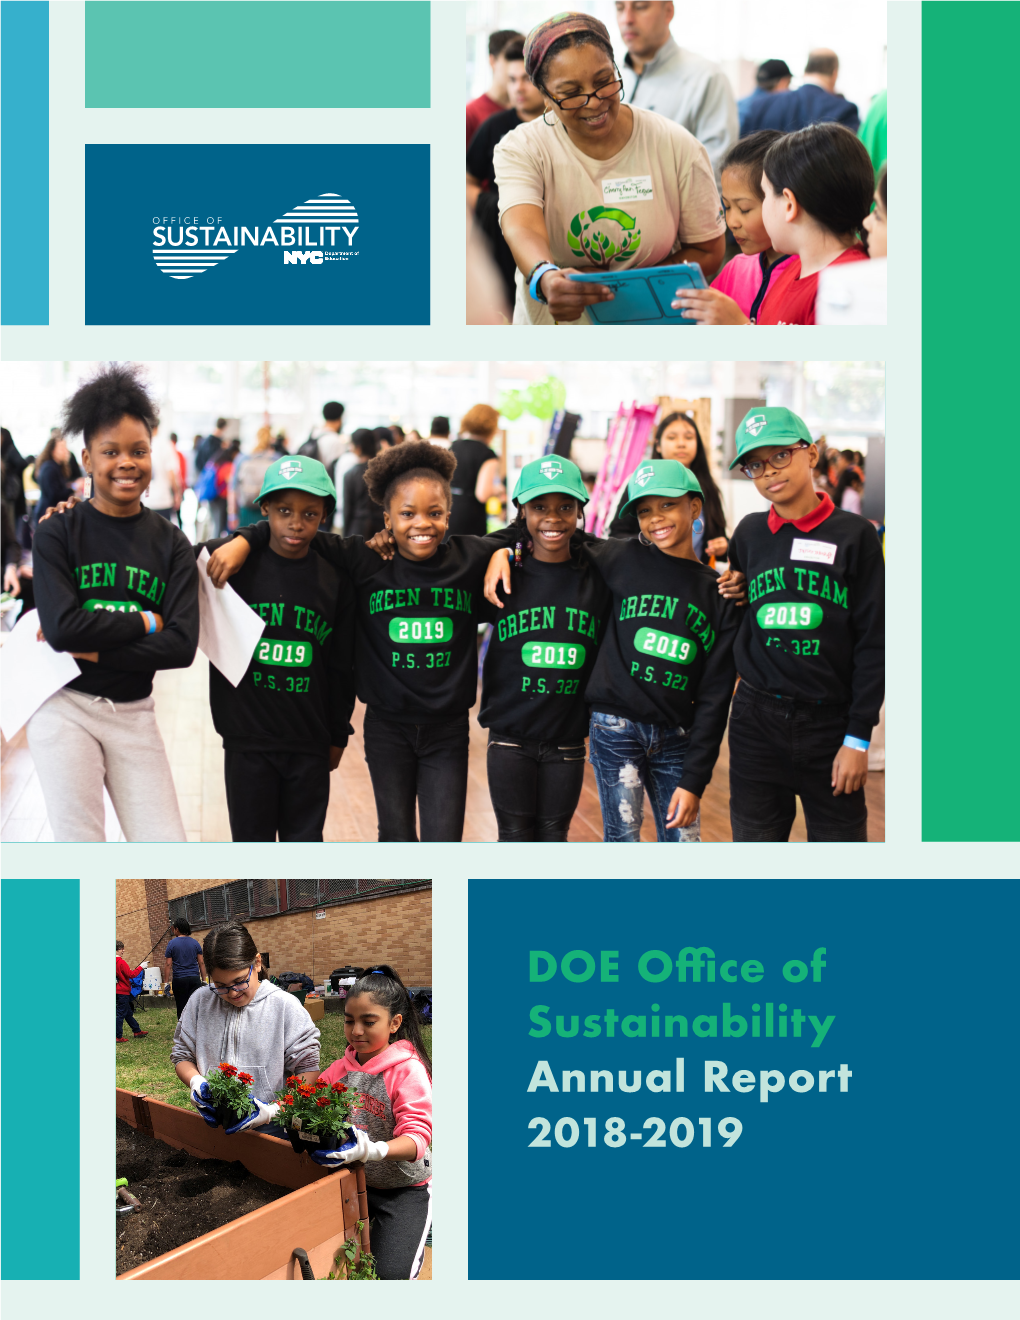 DOE Office of Sustainability Annual Report 2018-2019